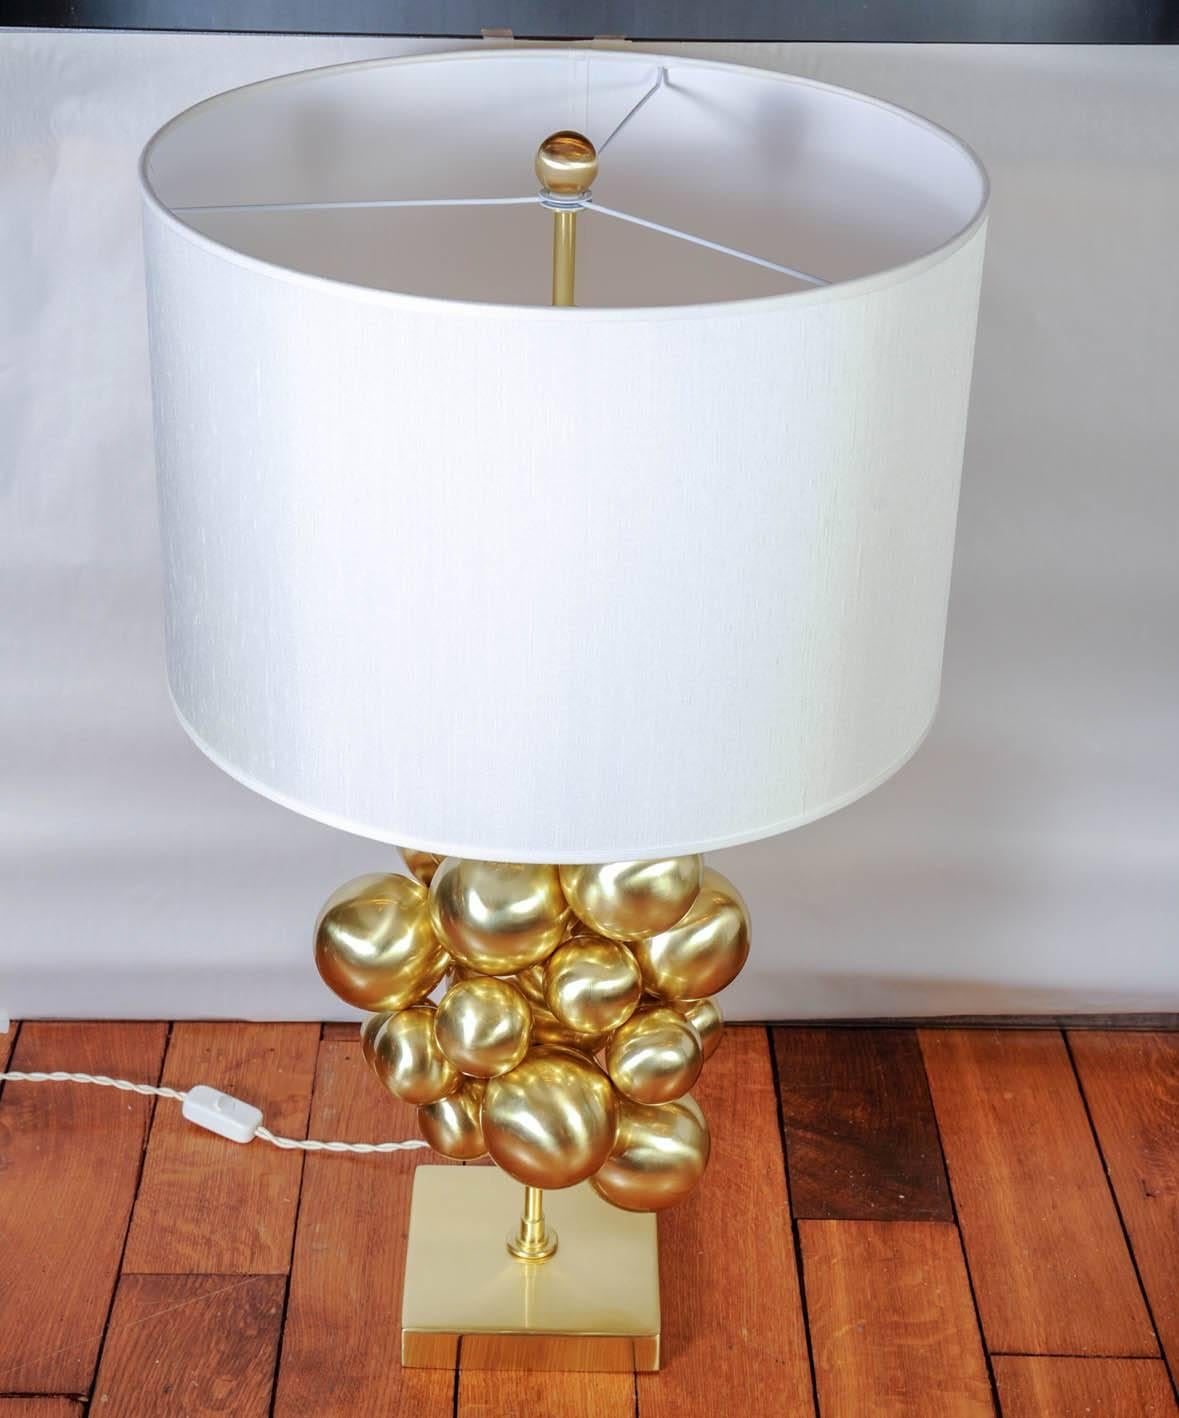 Pair of elegant table lamps made entirely of brass. Square foot with central stem holding a cloud of multiple spheres of different sizes.